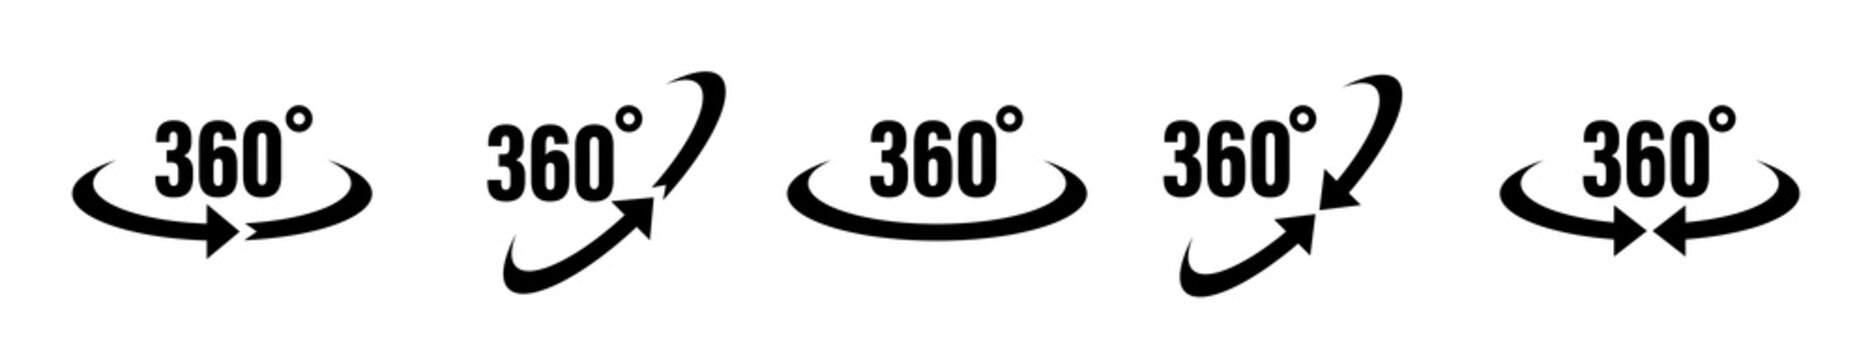 360 degrees vector icon. Round signs with arrows rotation to 360 degrees. Rotate symbol isolated in white background. Vector illustration EPS 10.